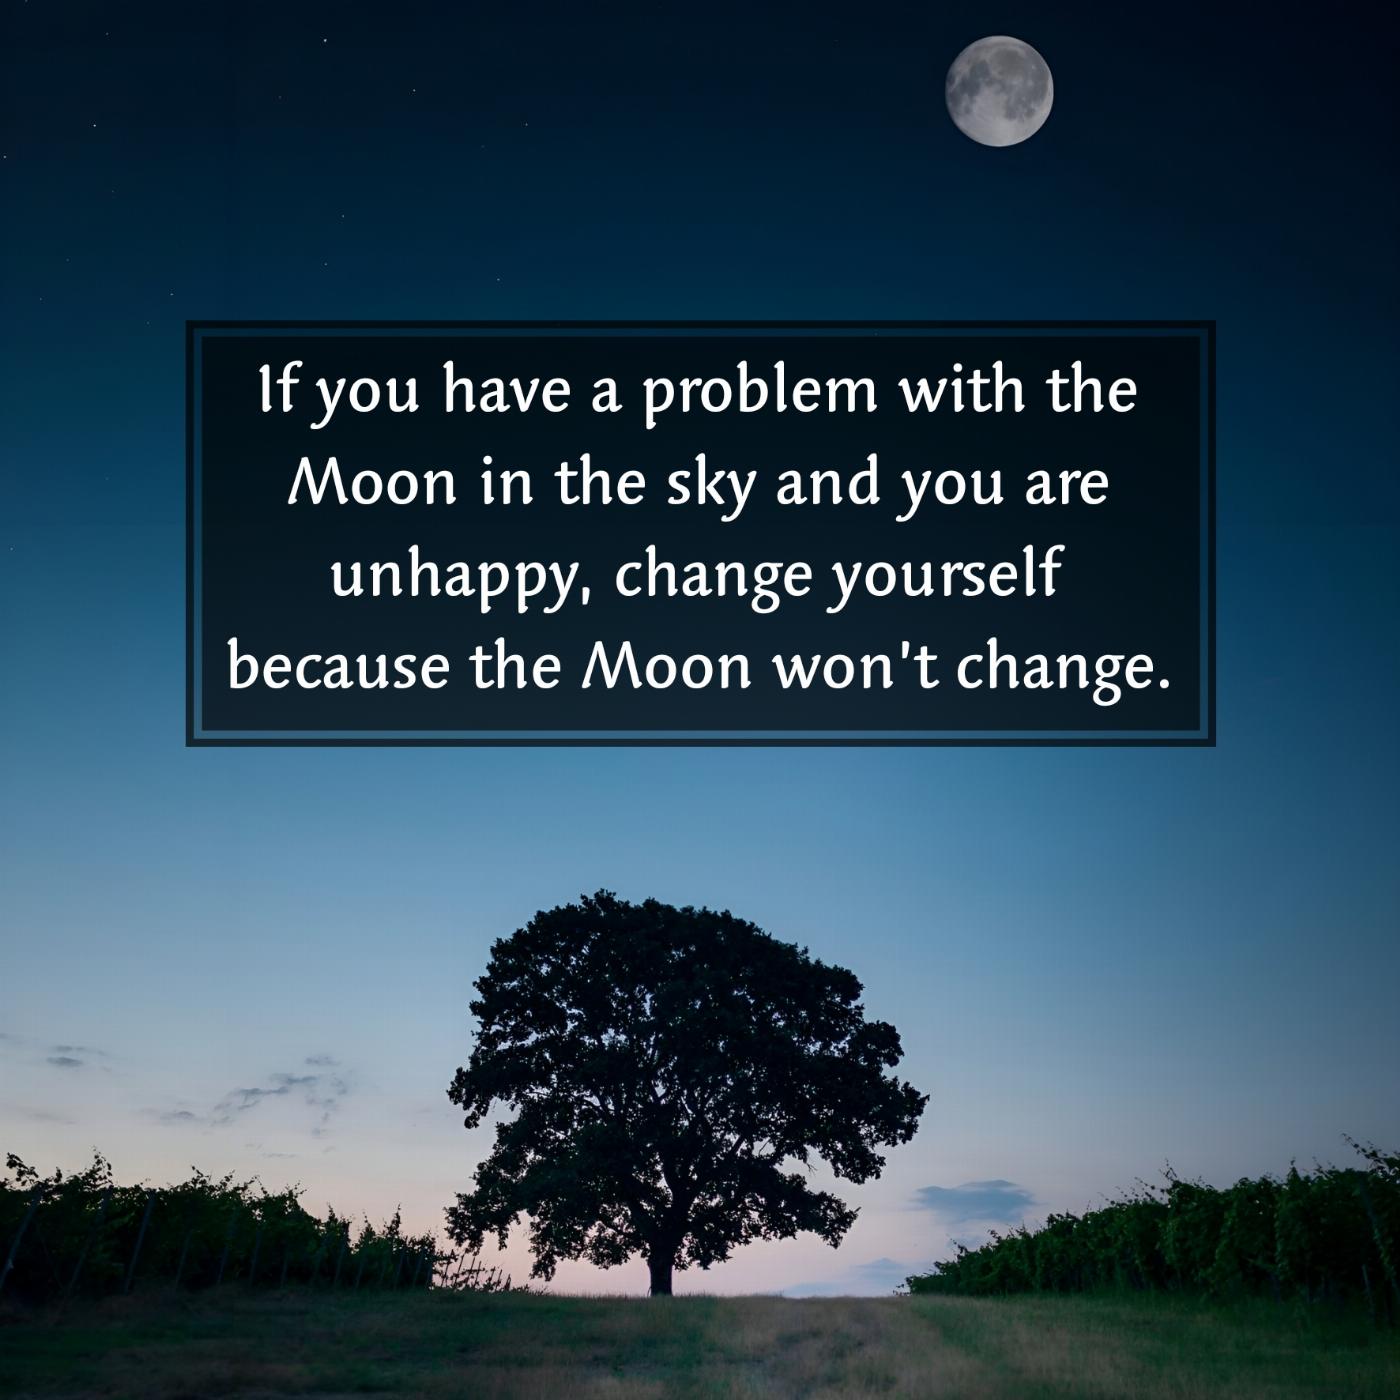 If you have a problem with the Moon in the sky